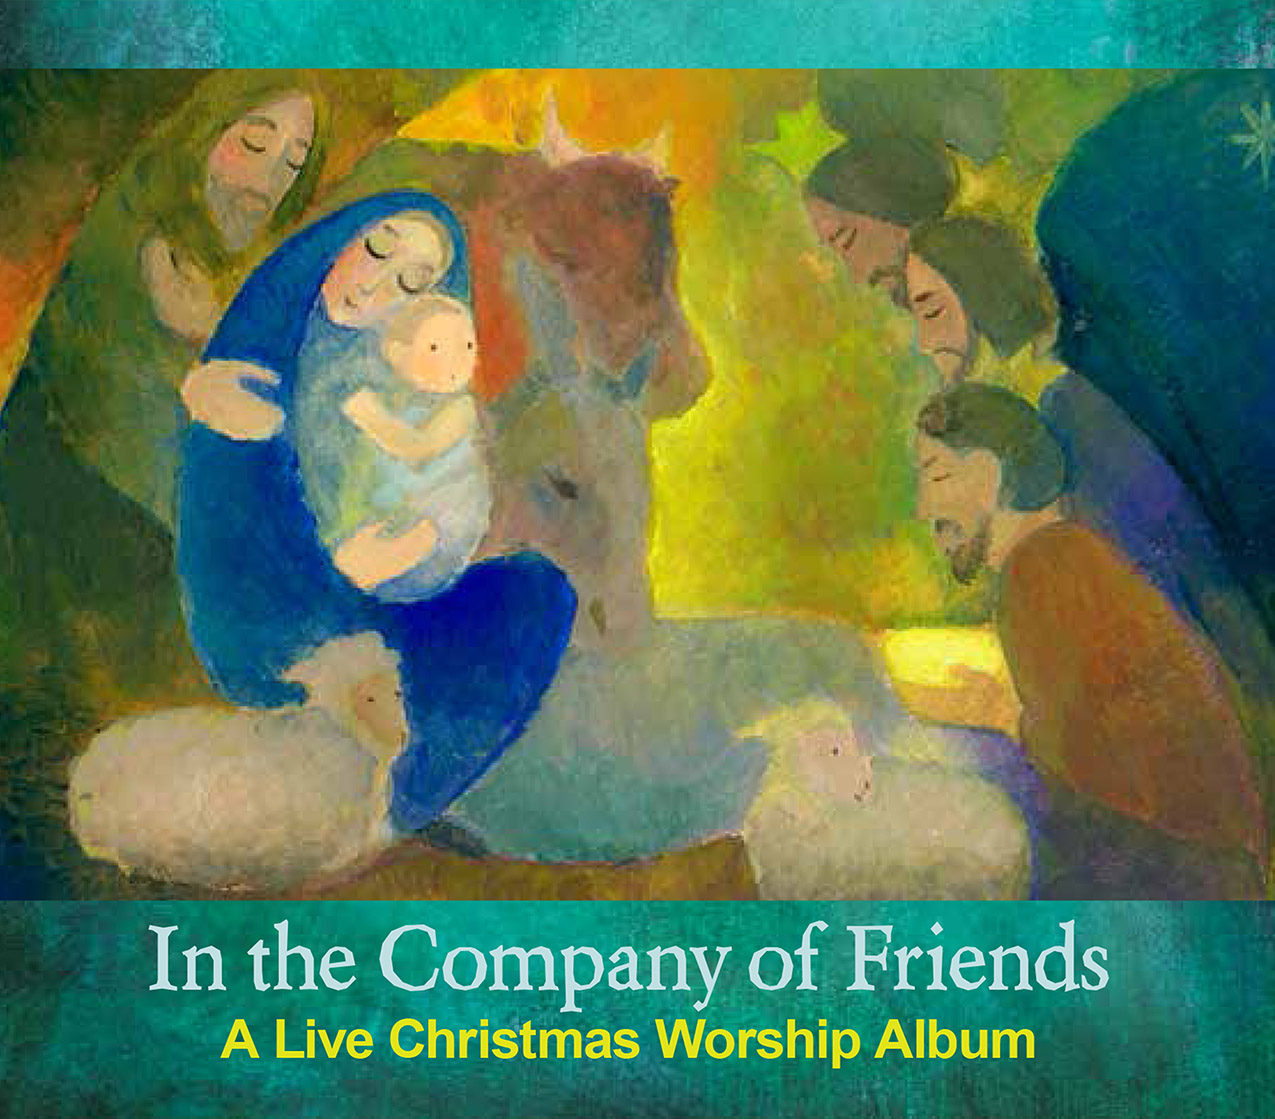 New Christmas album connects traditions new and old Institute For